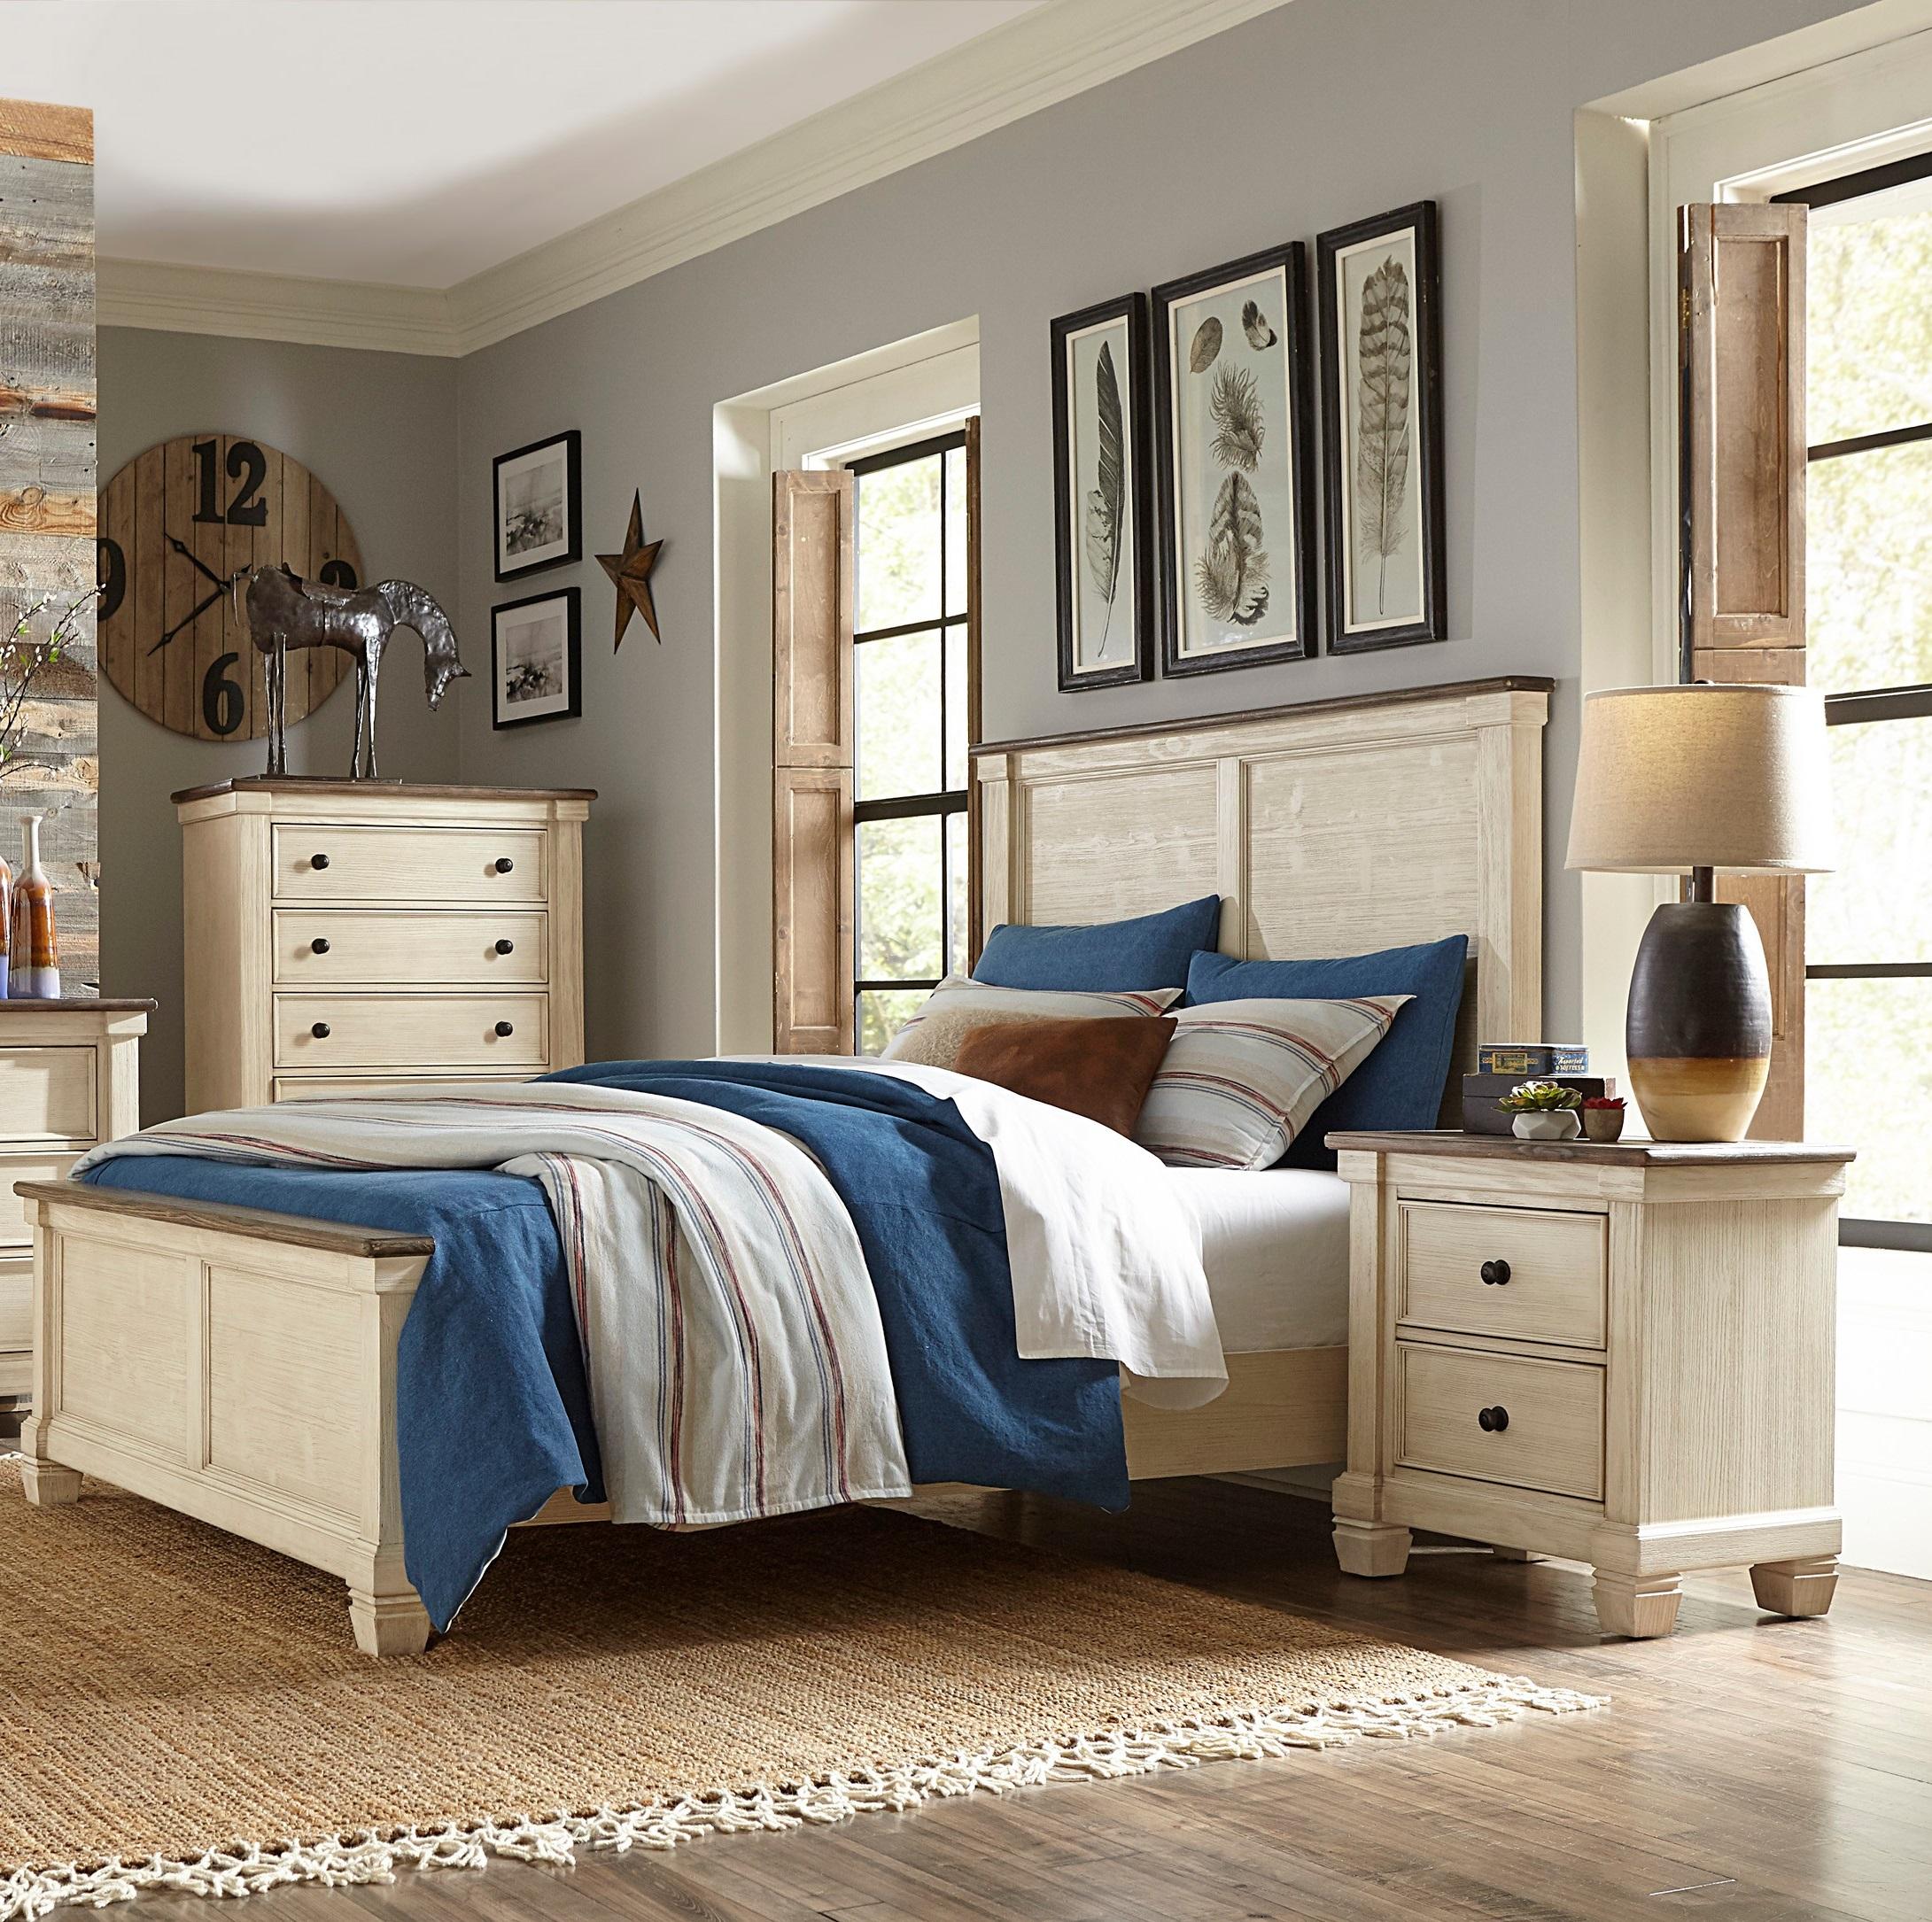 Transitional Bedroom Set 1626-1*-3PC Weaver 1626-1*-3PC in Antique White, Brown 